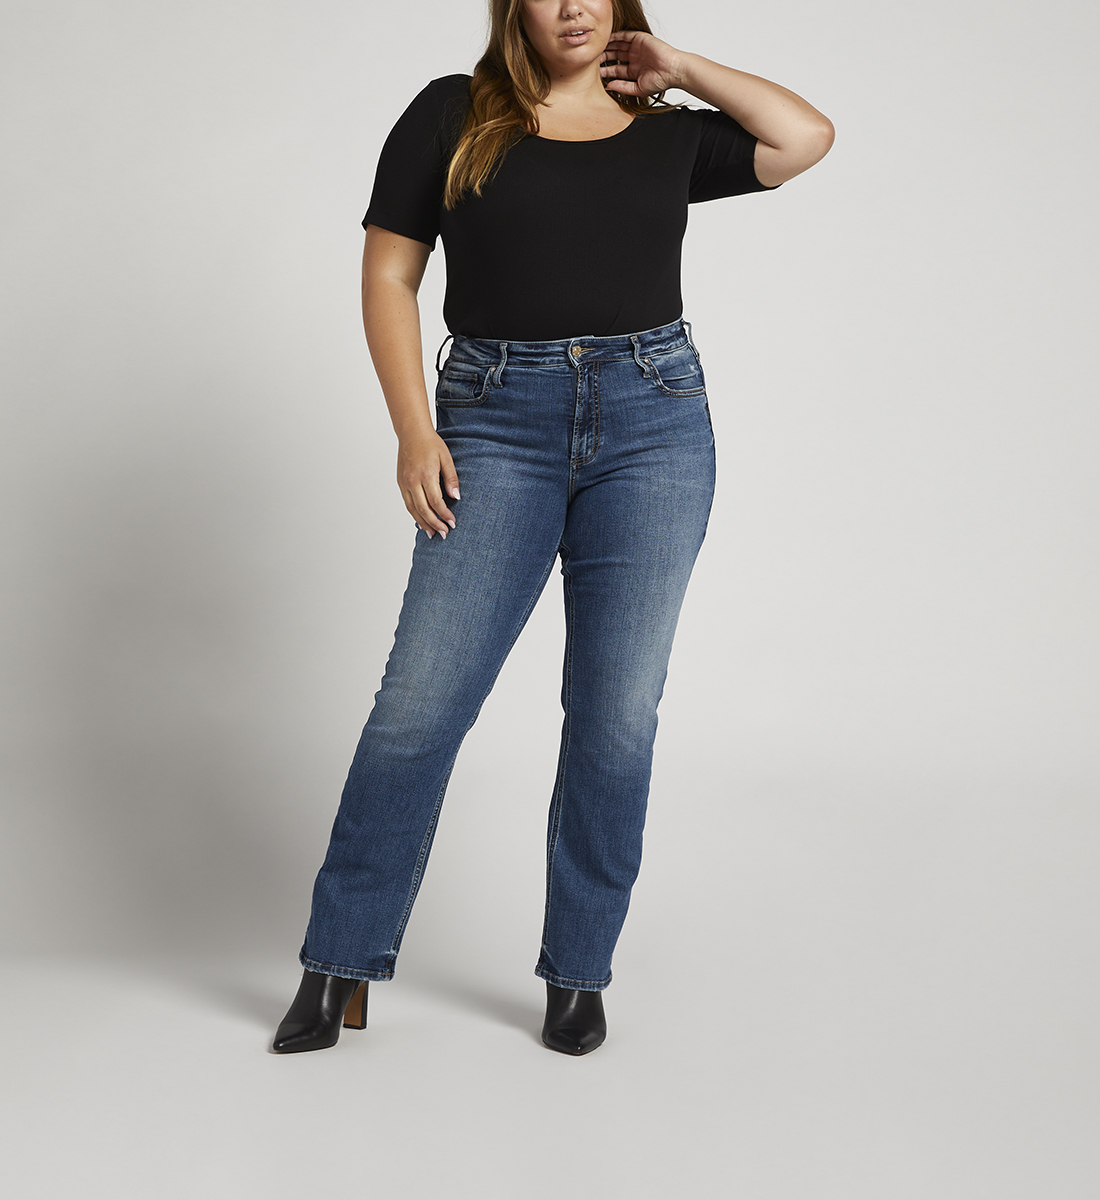 Silver Jeans Avery High Rise Slim Bootcut Jeans Plus Size